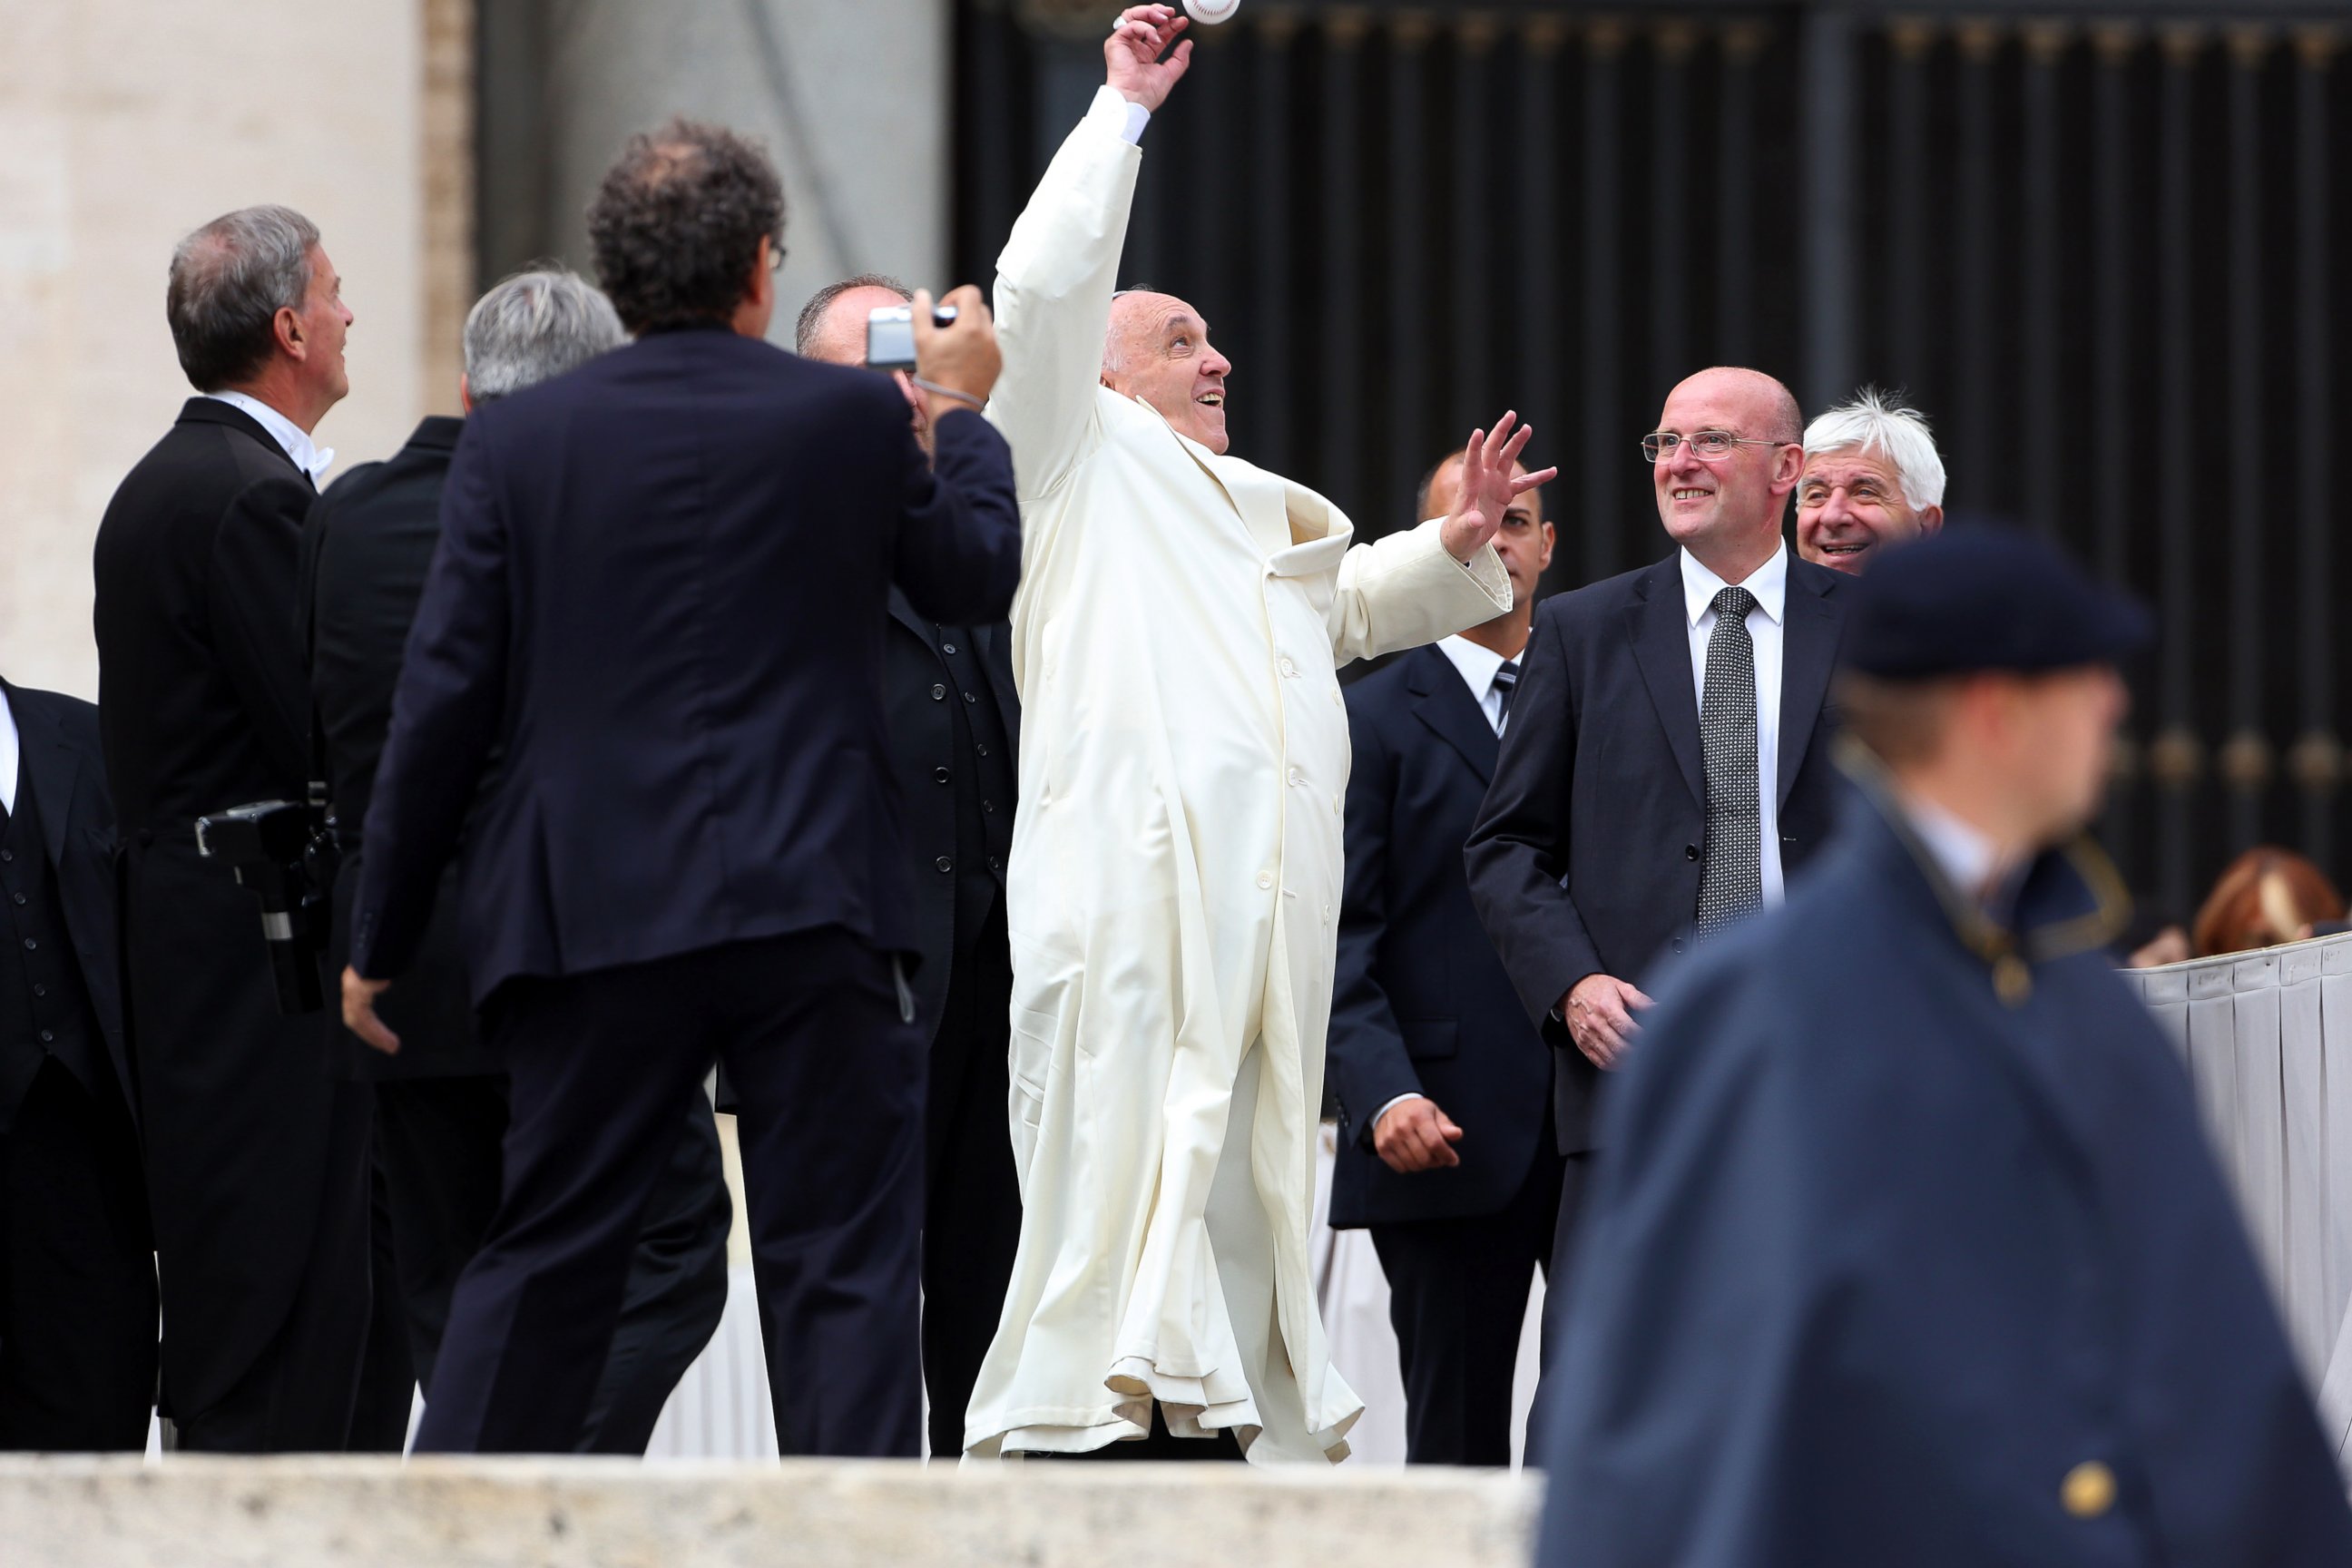 PHOTO: Pope Francis jumps to catch a baseball ball thrown by a faithful at the end of his weekly audience at St. Peter's Square on Sept. 24, 2014 in Vatican City, Vatican.